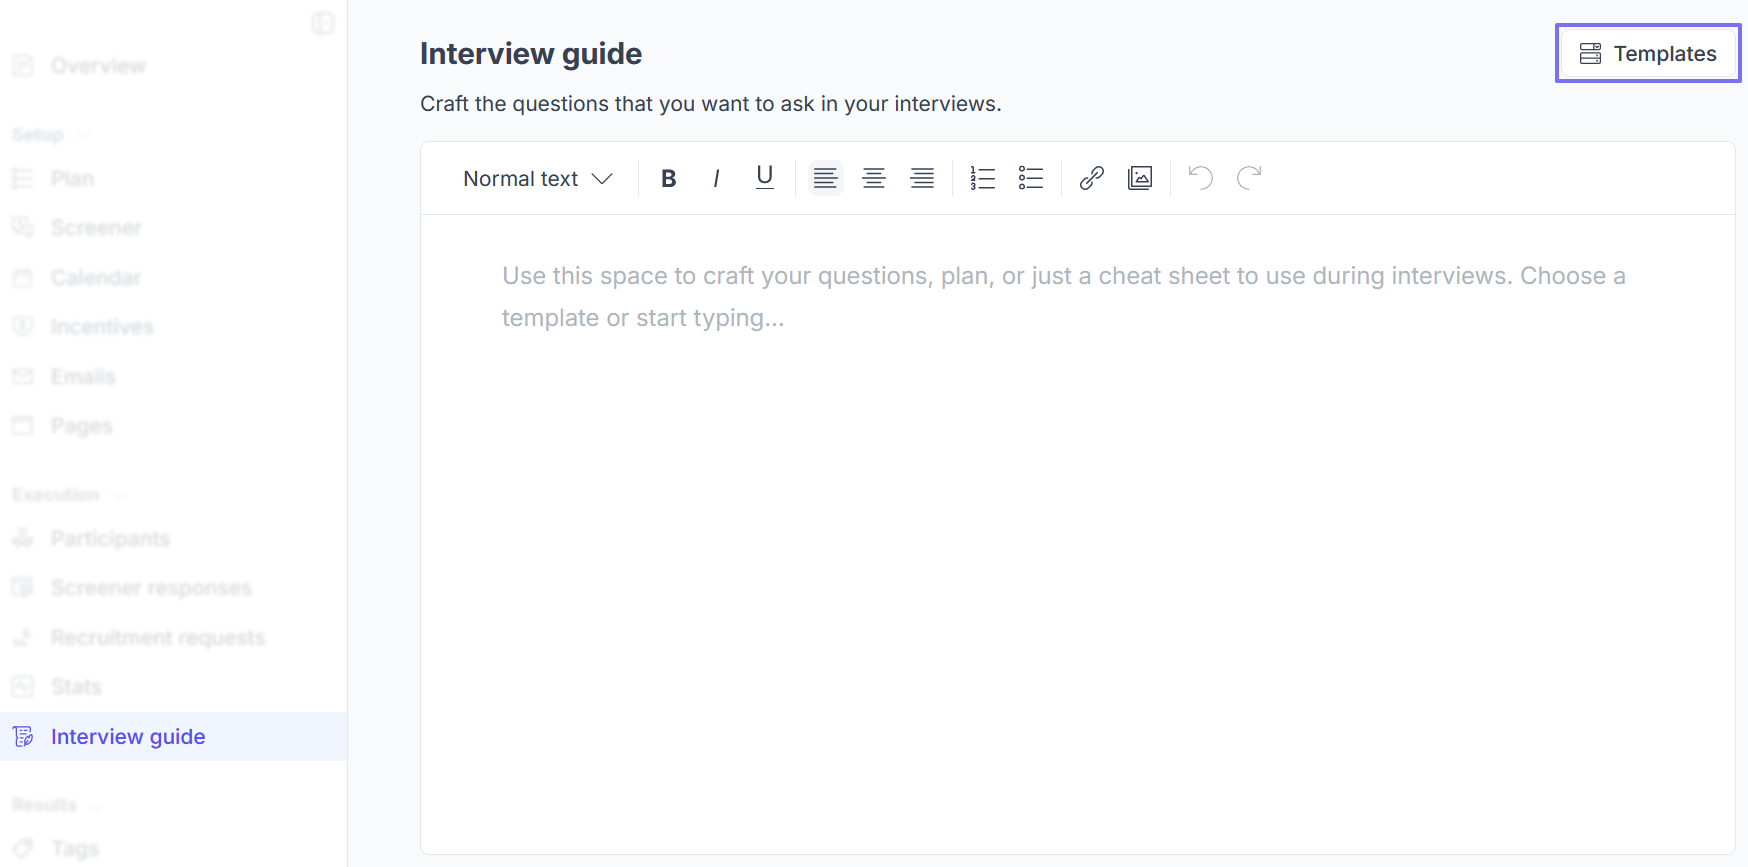 Interview guide view